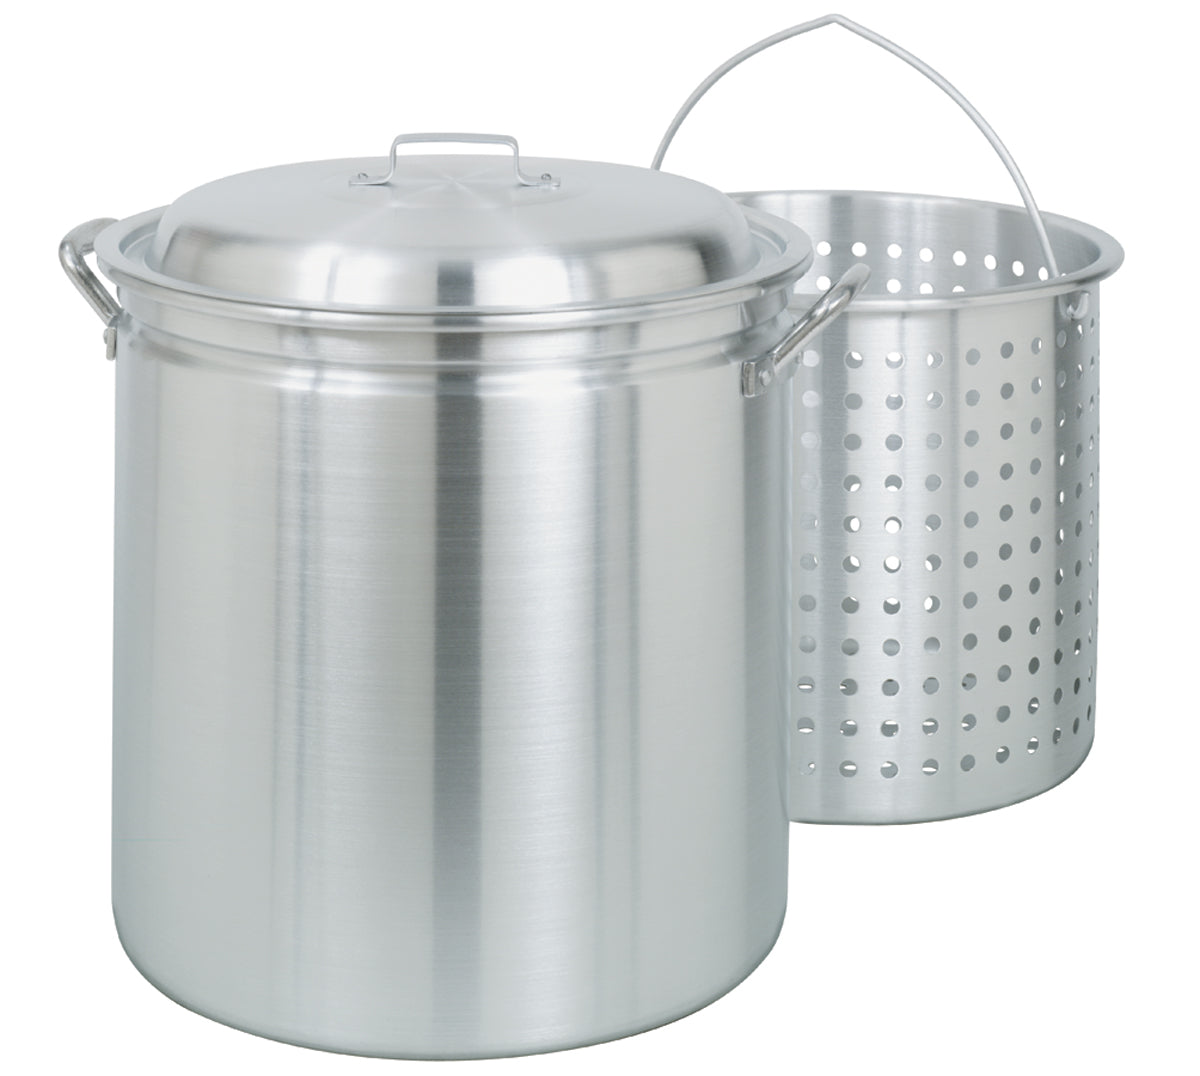 42-qt Aluminum Stockpot with Basket ~ a handcrafted classic